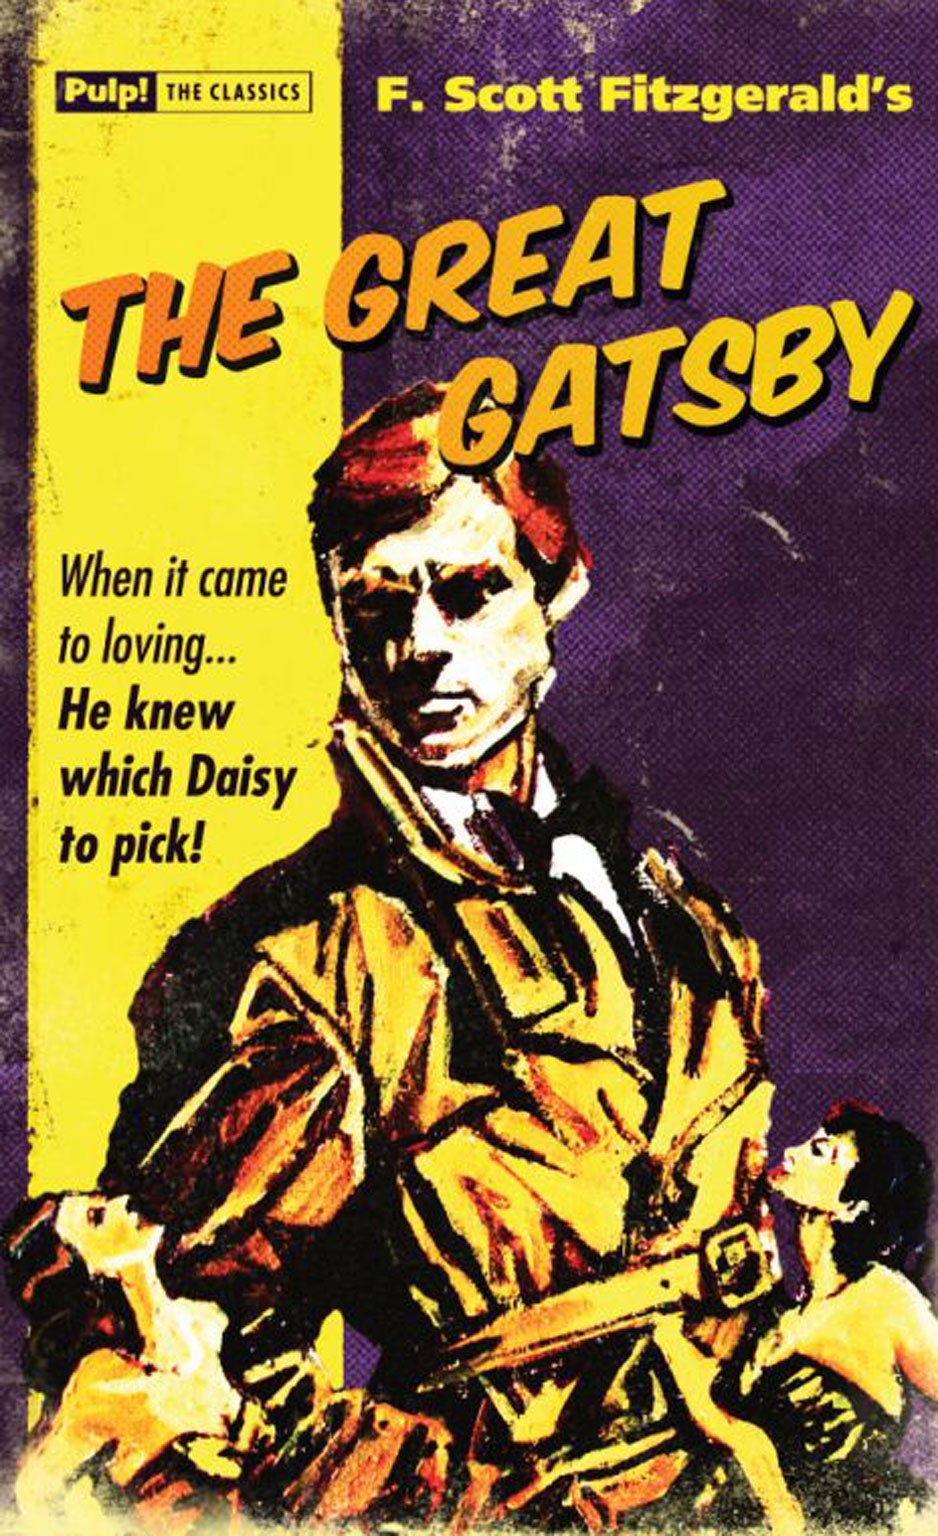 Oldcastle Books' "pulped" cover of the Fitzgerald's classic, The Great Gatsby